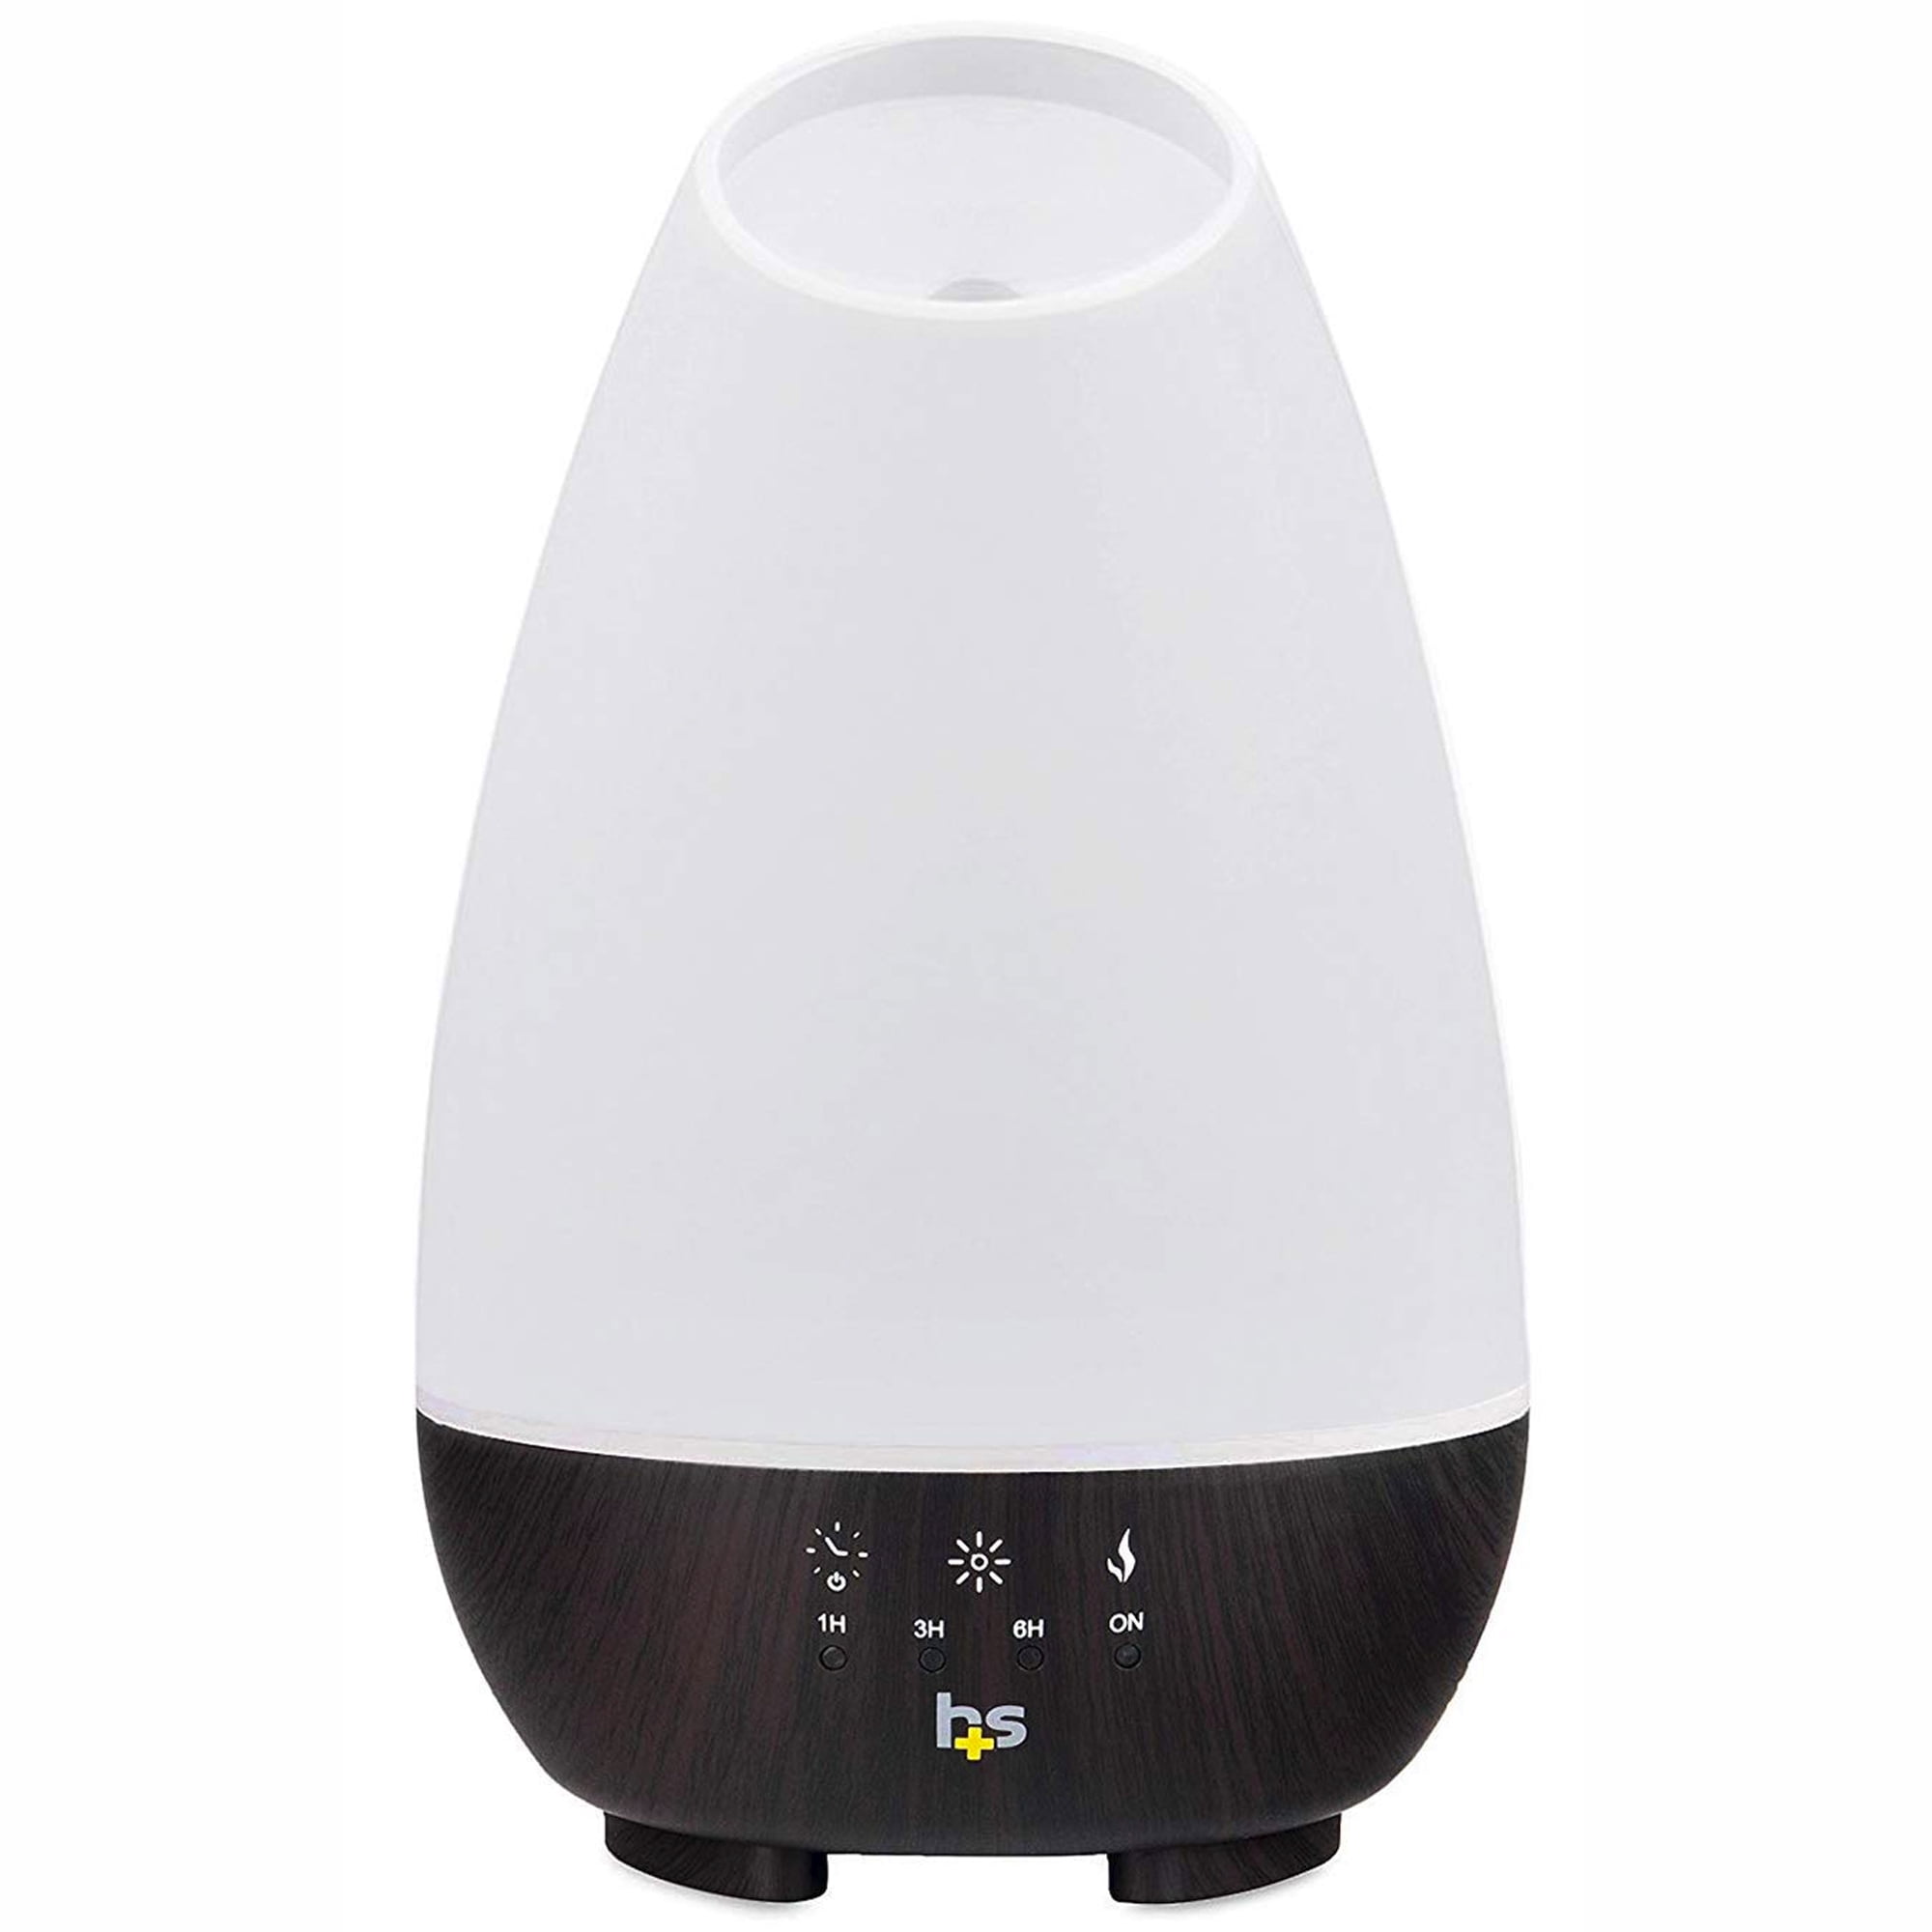 HealthSmart Essential Oil Diffuser, Cool Mist Humidifier and